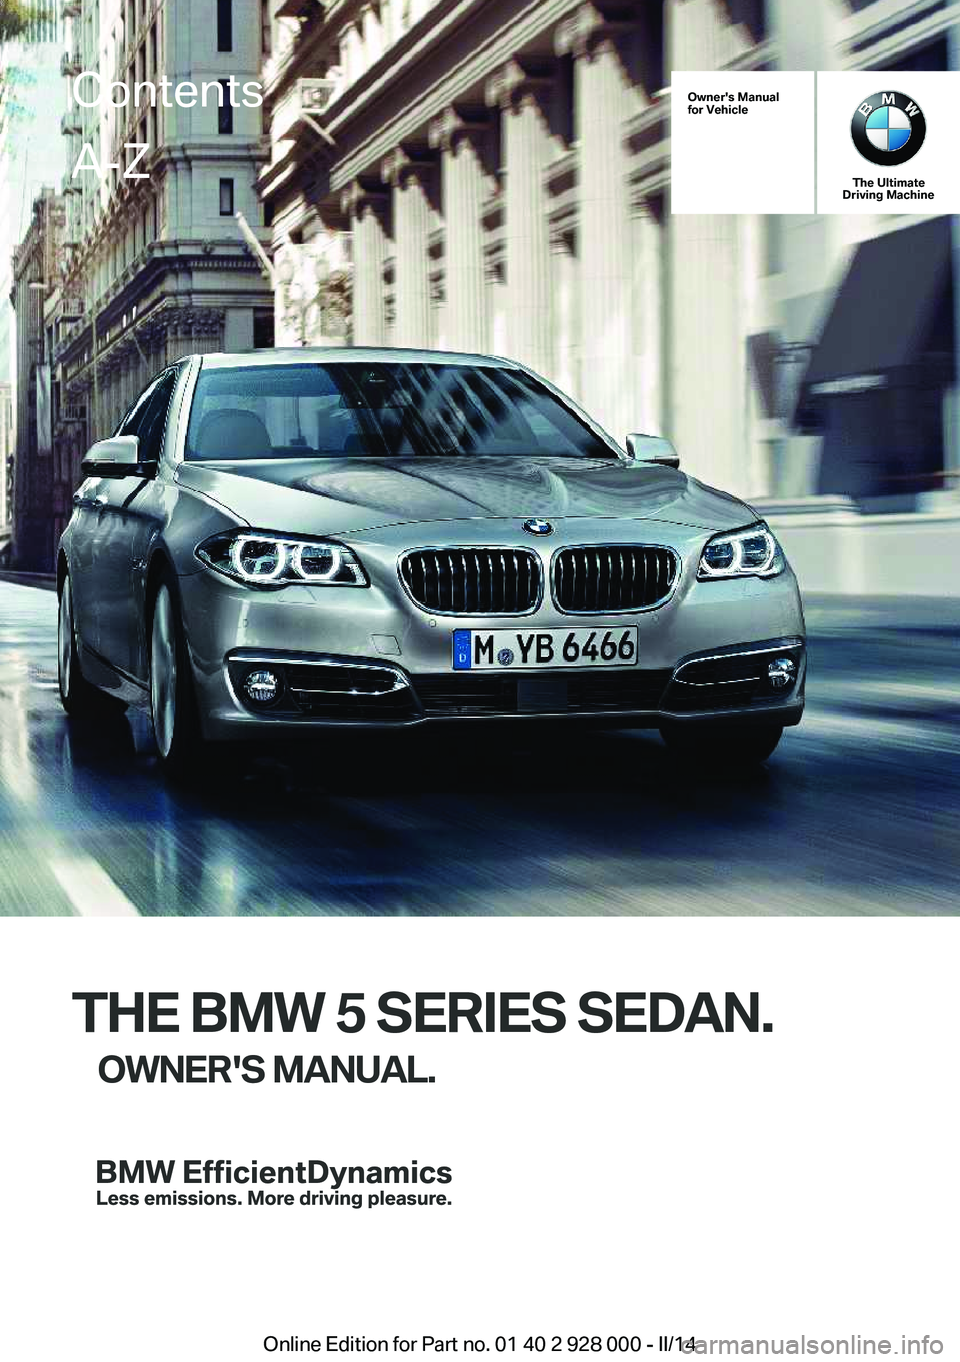 BMW 550I XDRIVE 2014  Owners Manual Owner's Manual
for Vehicle
The Ultimate
Driving Machine
THE BMW 5 SERIES SEDAN.
OWNER'S MANUAL.
ContentsA-Z
Online Edition for Part no. 01 40 2 928 000 - II/14   